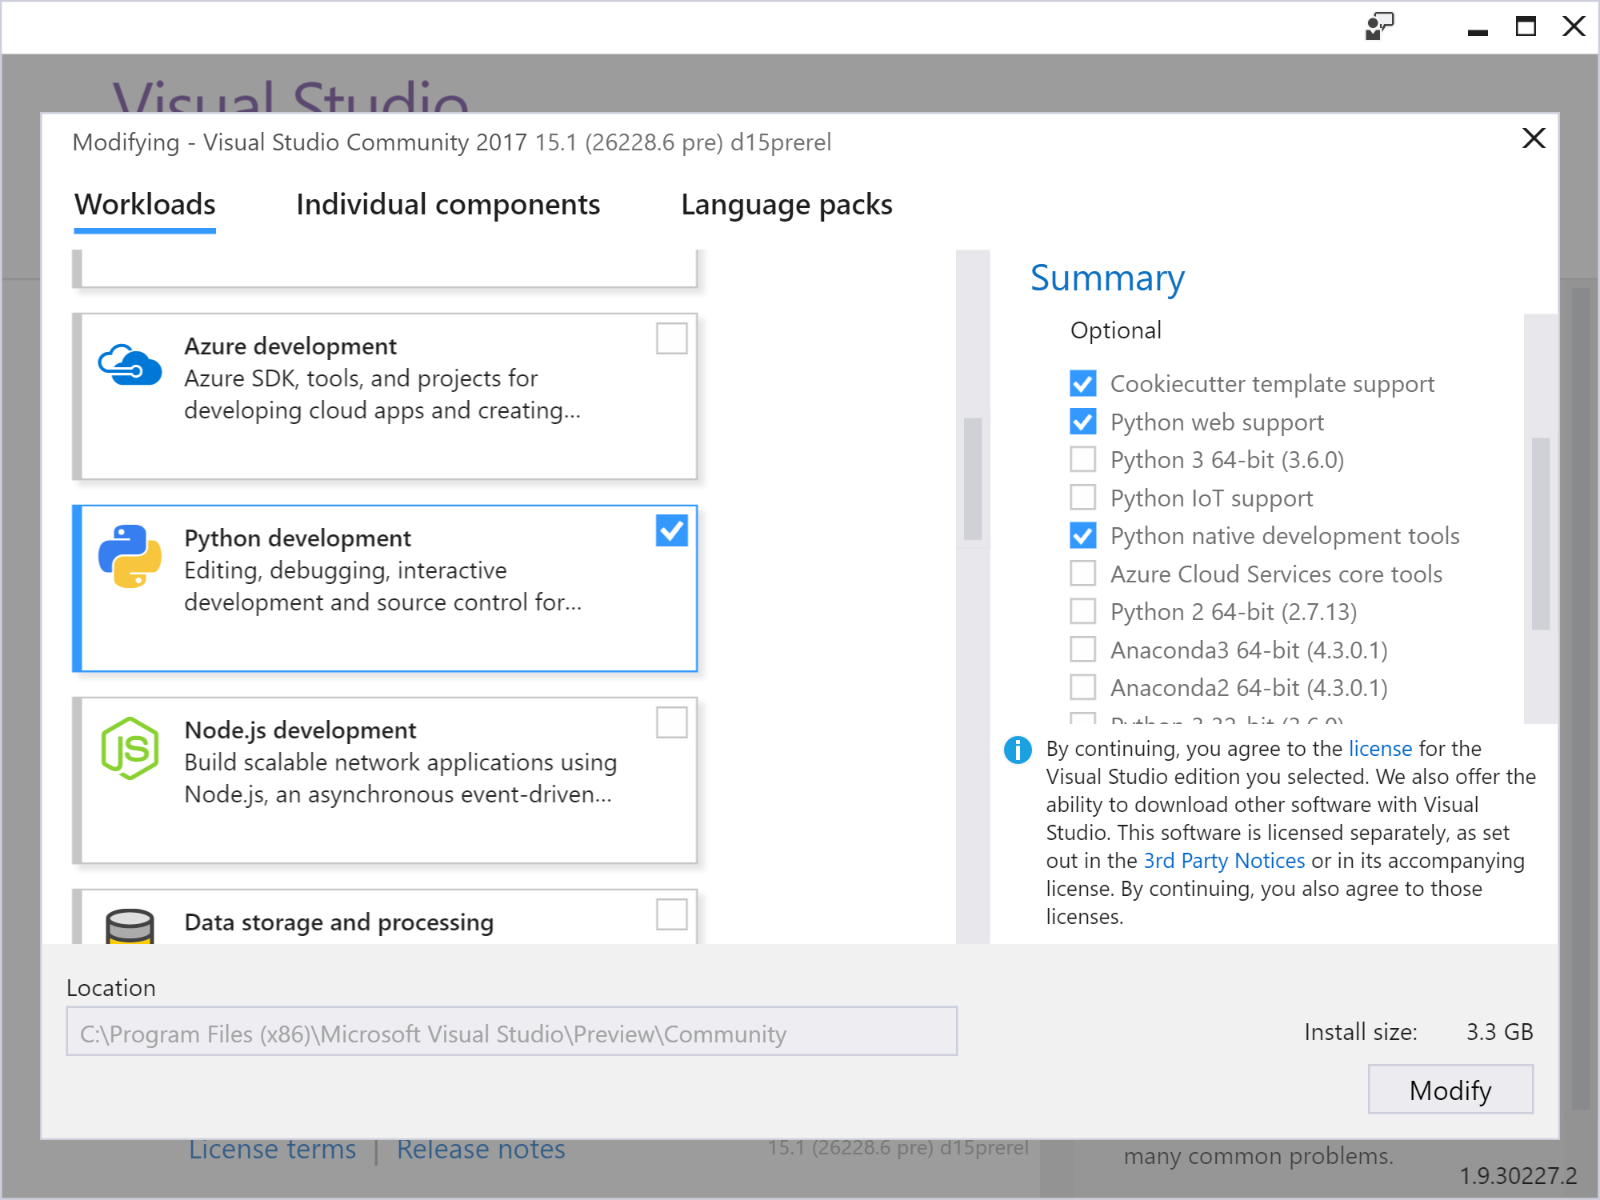 How to use visual studio for c++